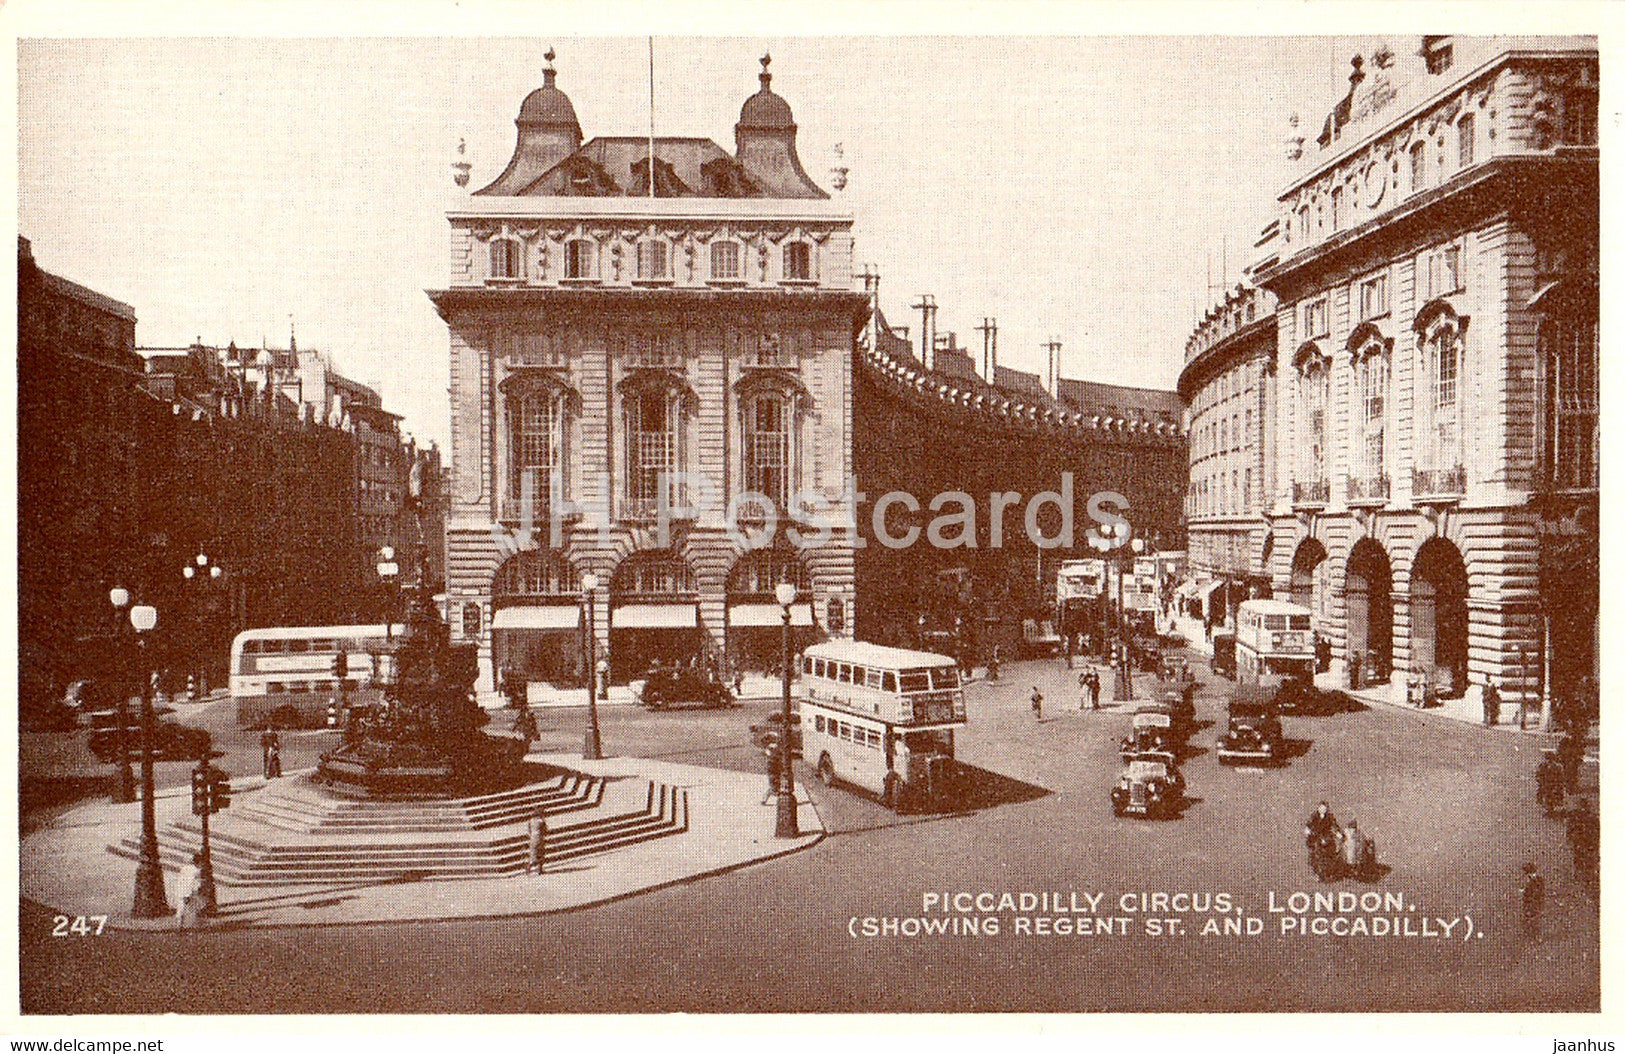 London - Piccadilly Circus - Showing Regent St and Piccadilly - bus - old postcard - United Kingdom - England - unused - JH Postcards